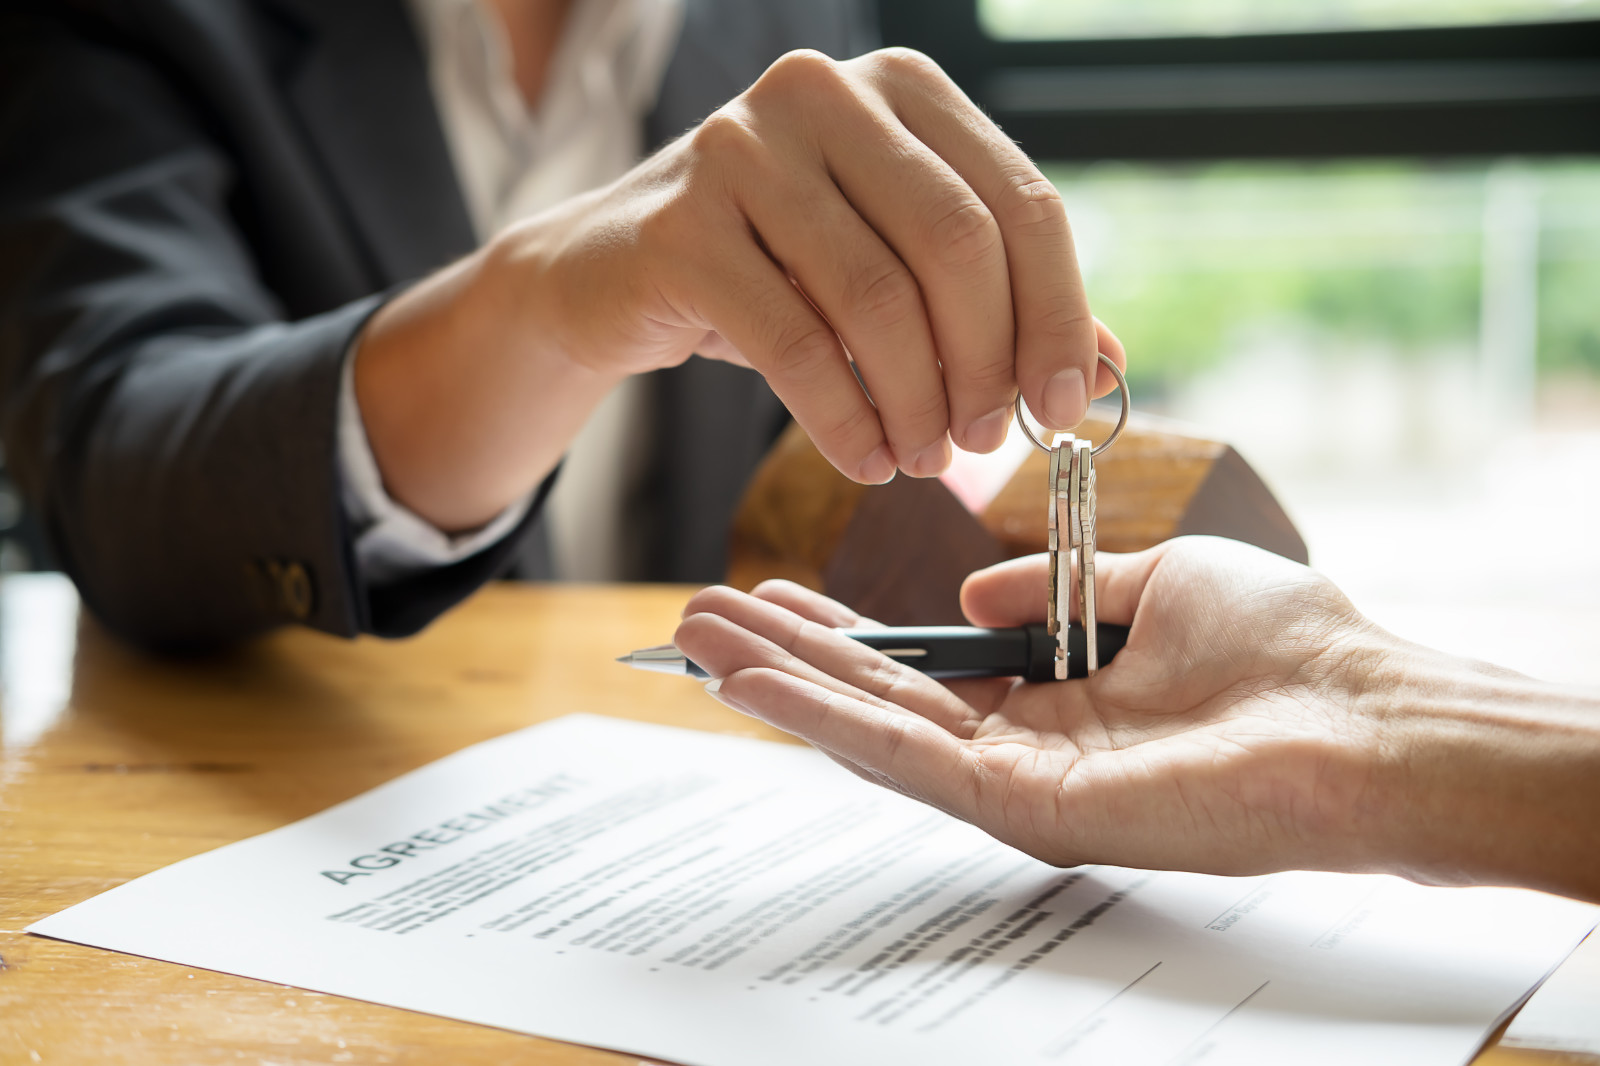 real estate agent holding house key to his client after signing contract agreement in office,concept for real estate, moving home or renting property